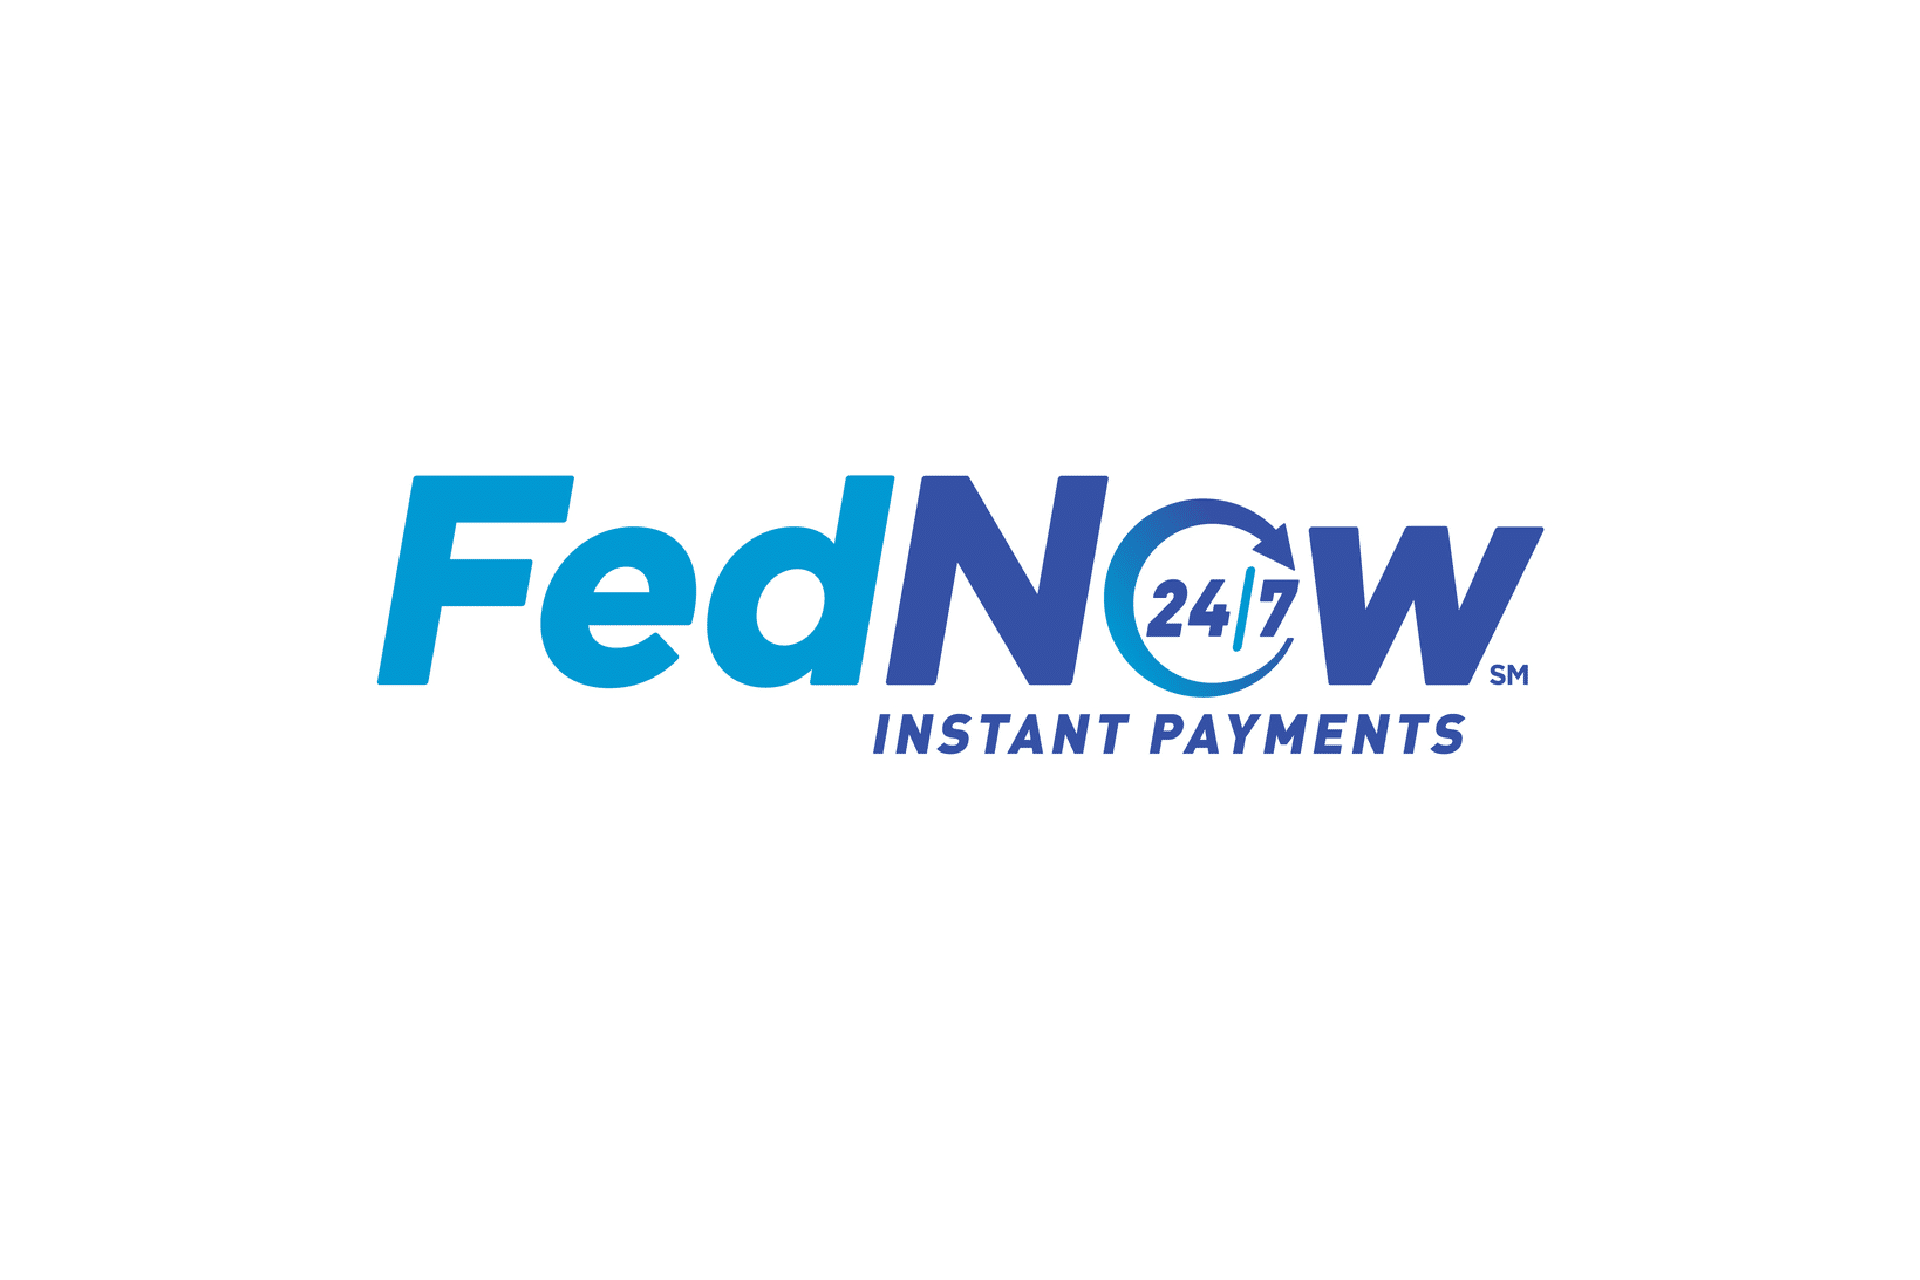 fednow service to tackle interchange fees